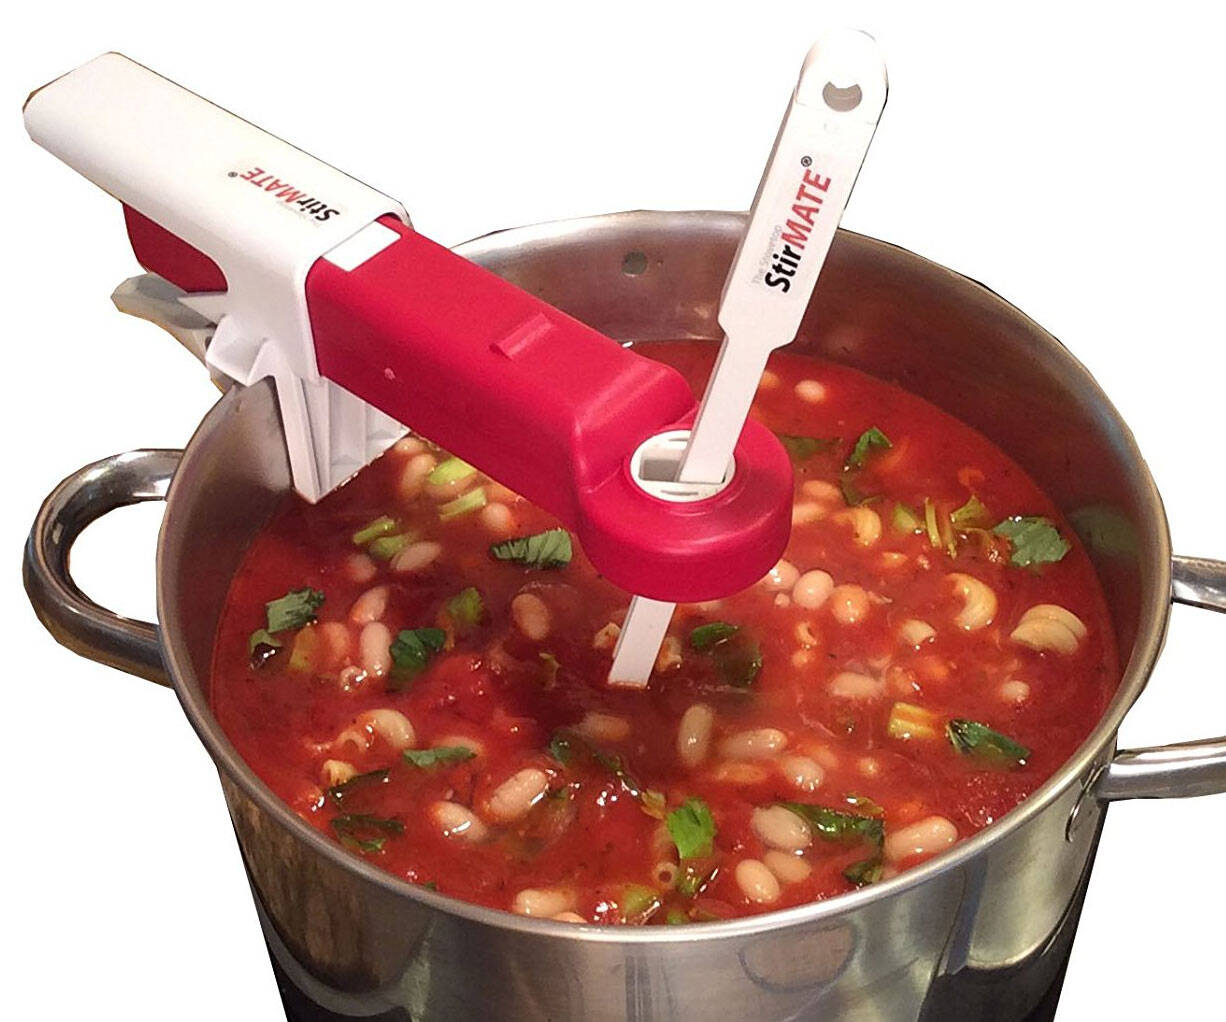 Smart Automatic Pot Stirrer - //coolthings.us